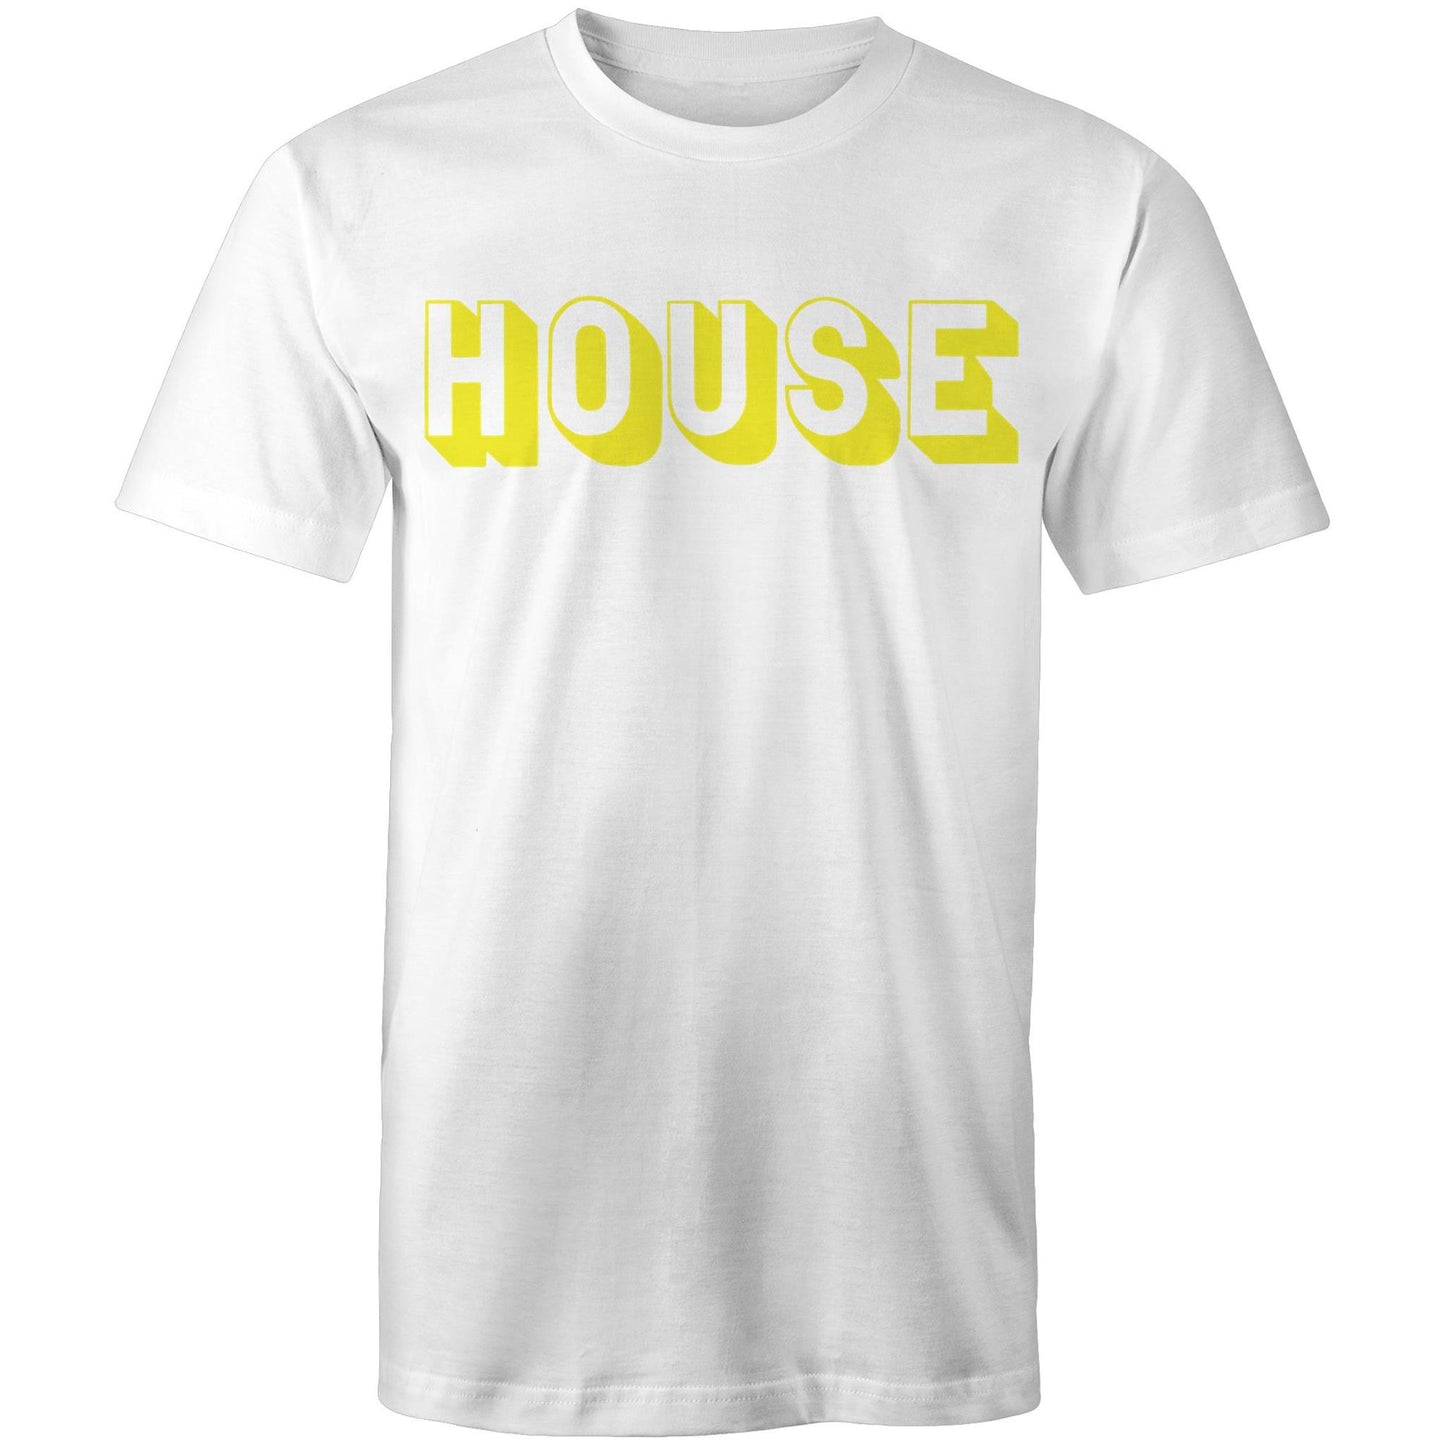 House is Our Religion front & back Mens Tee white